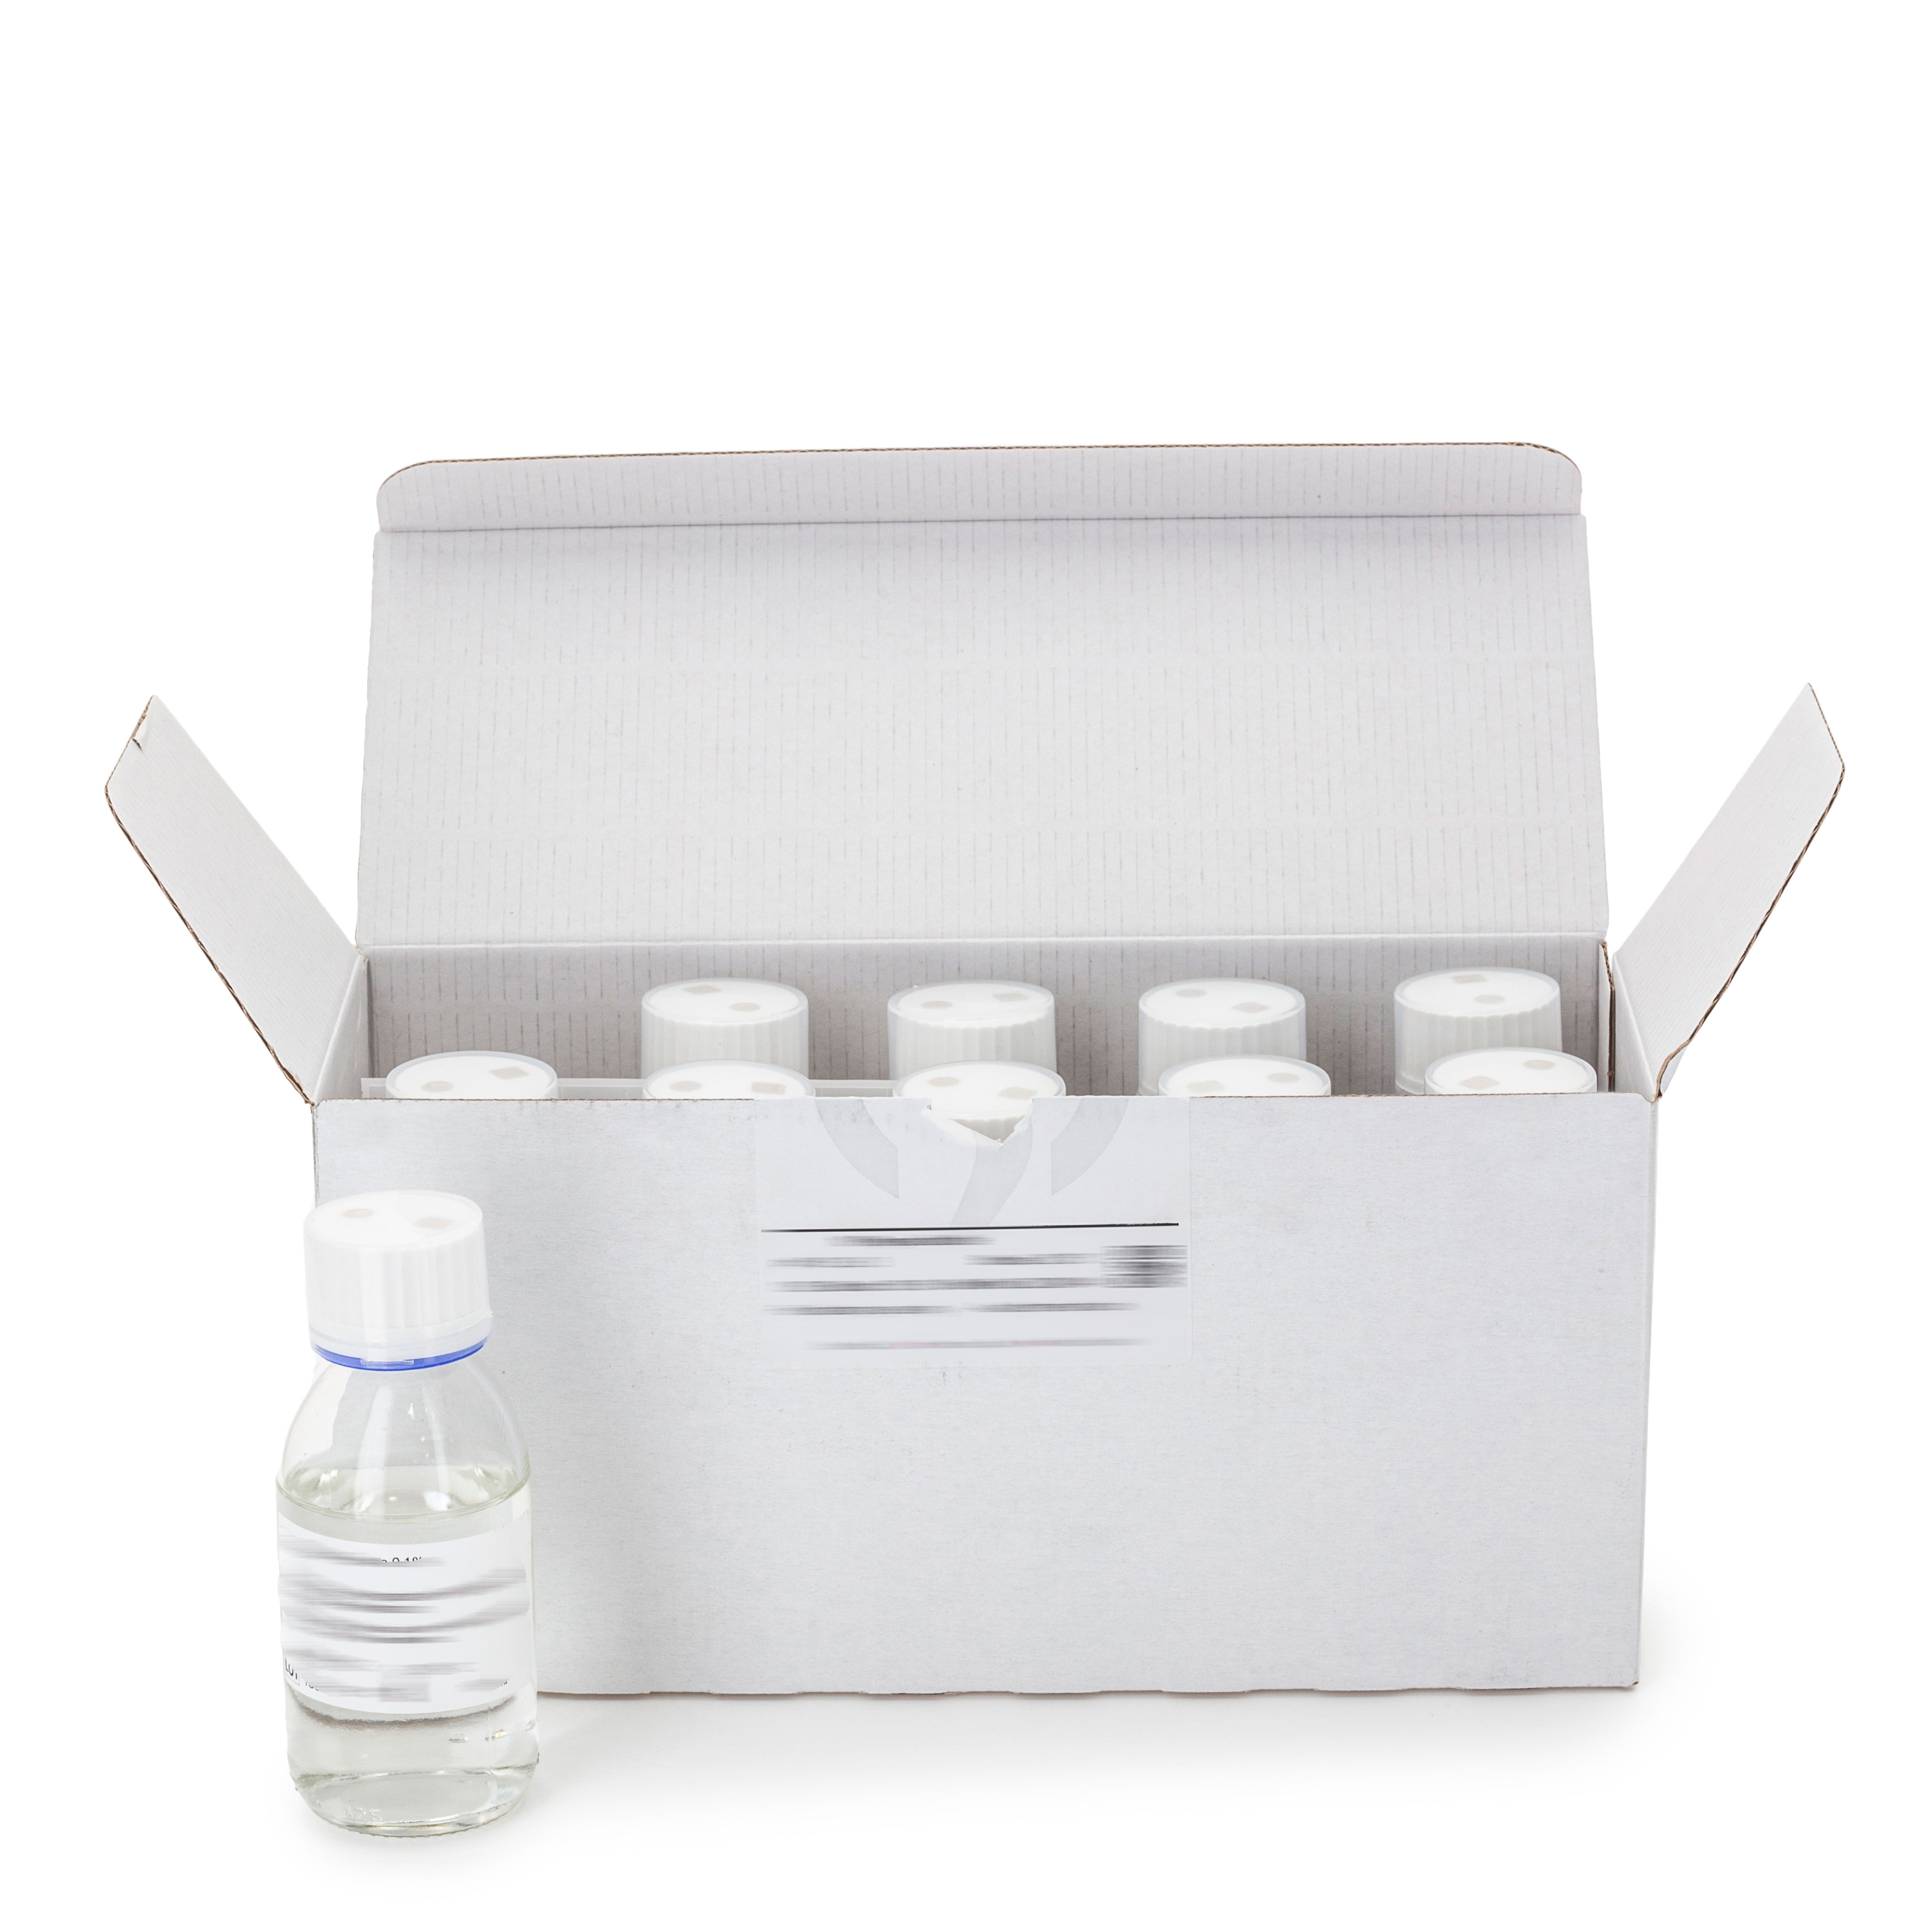 Tryptone Water (Peptone Water). Substrate with low nutrient capacity, for the detection of indol production in coliform microorganisms according to ISO 7251 standard.